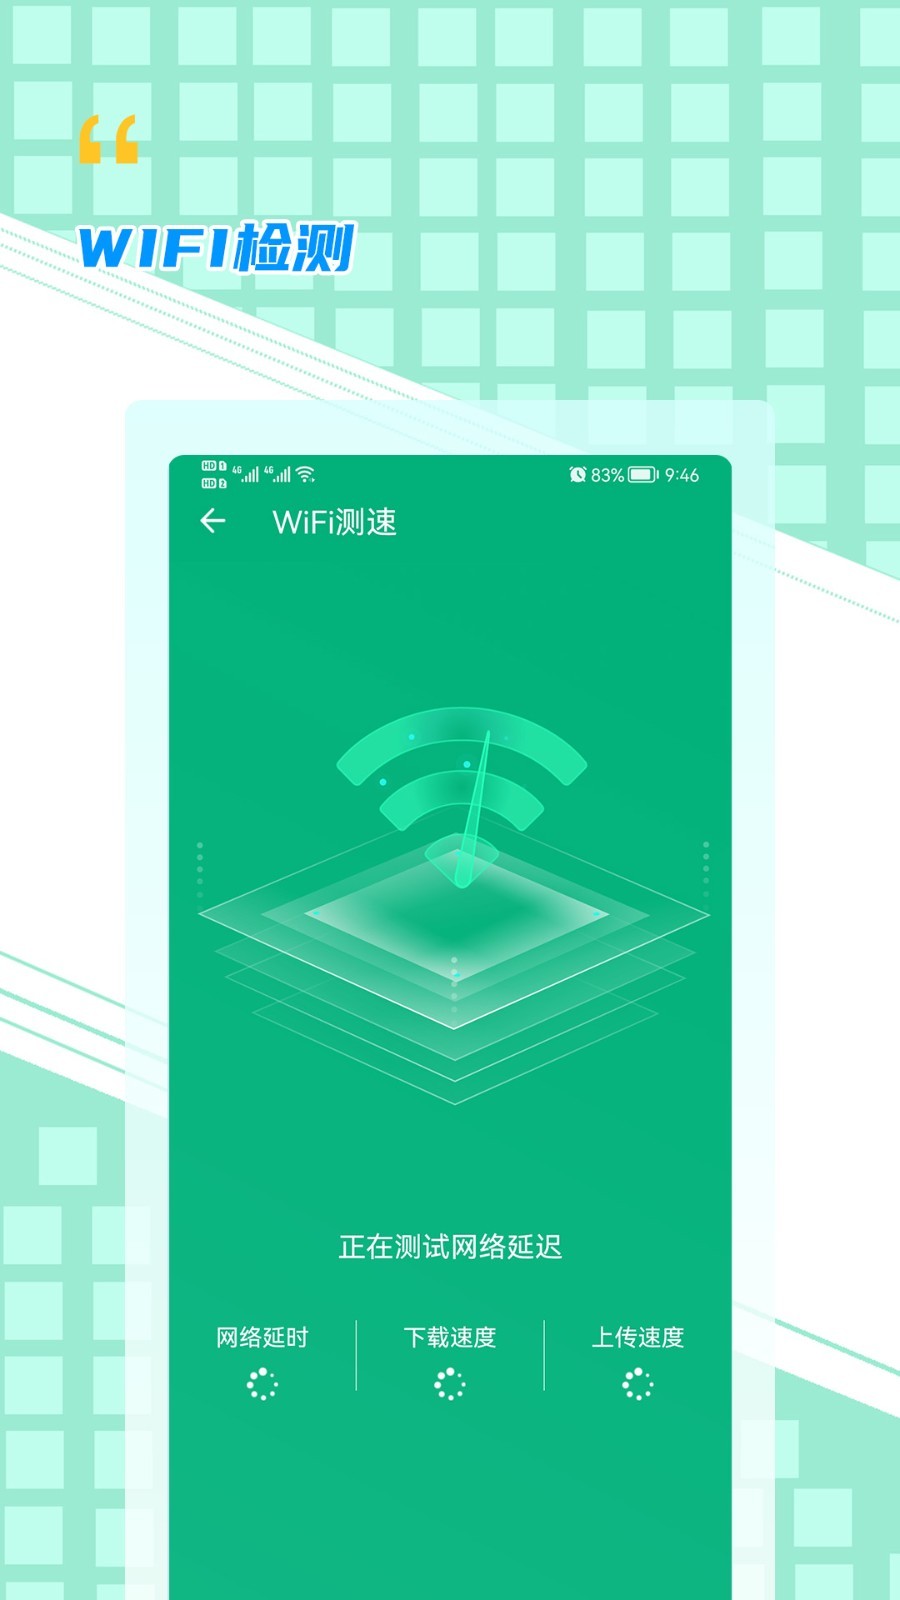 WiFi帮手